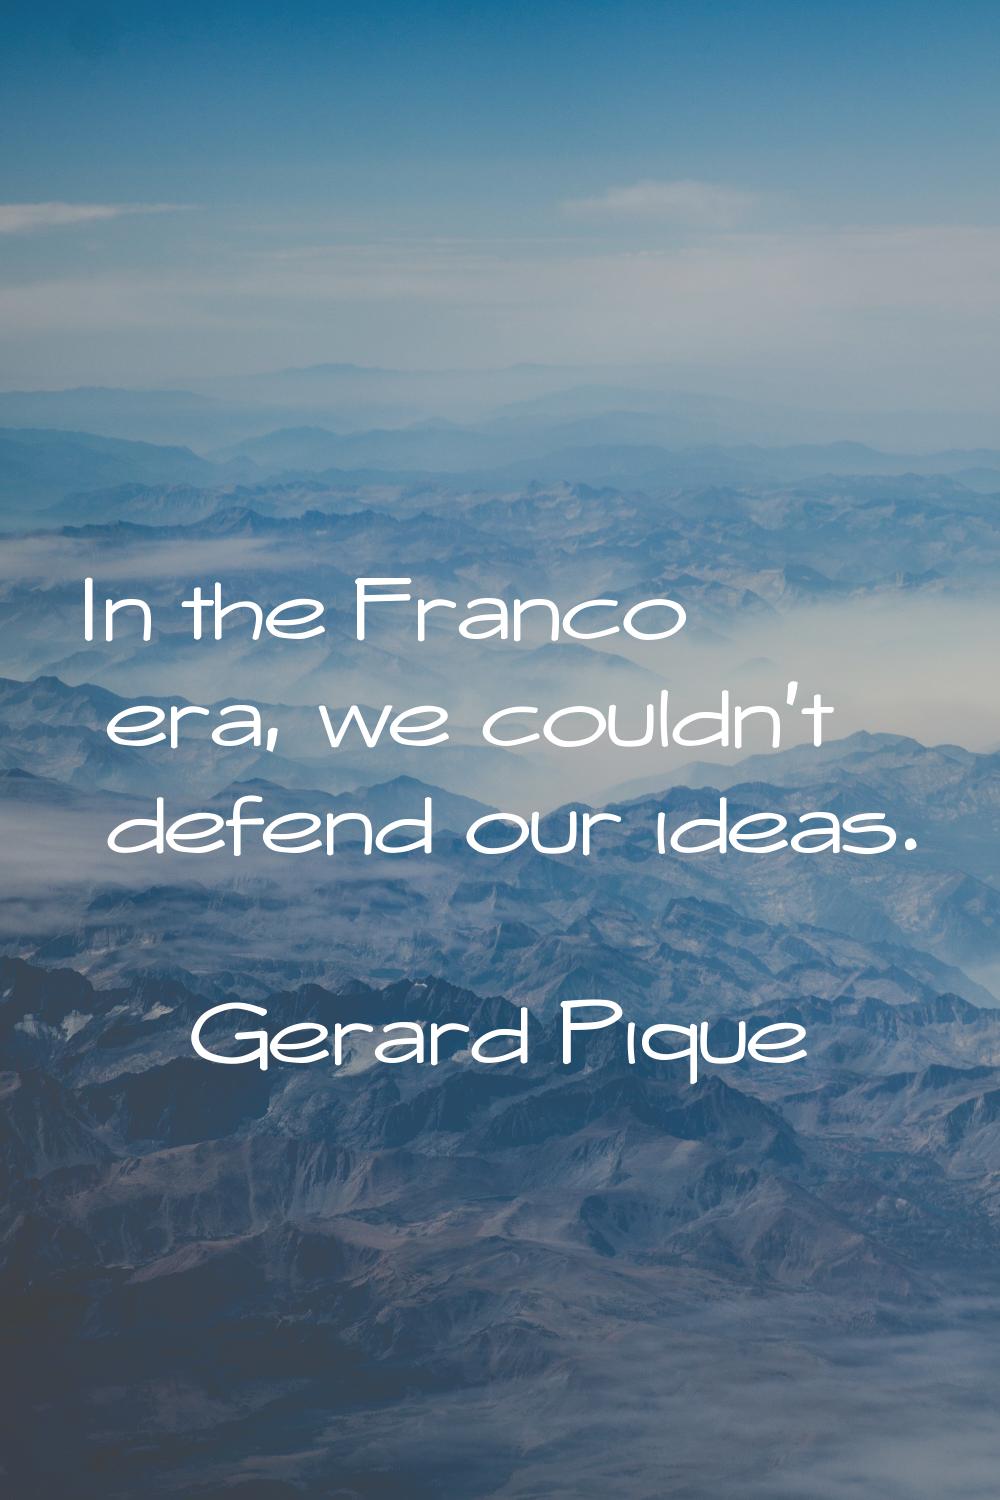 In the Franco era, we couldn't defend our ideas.